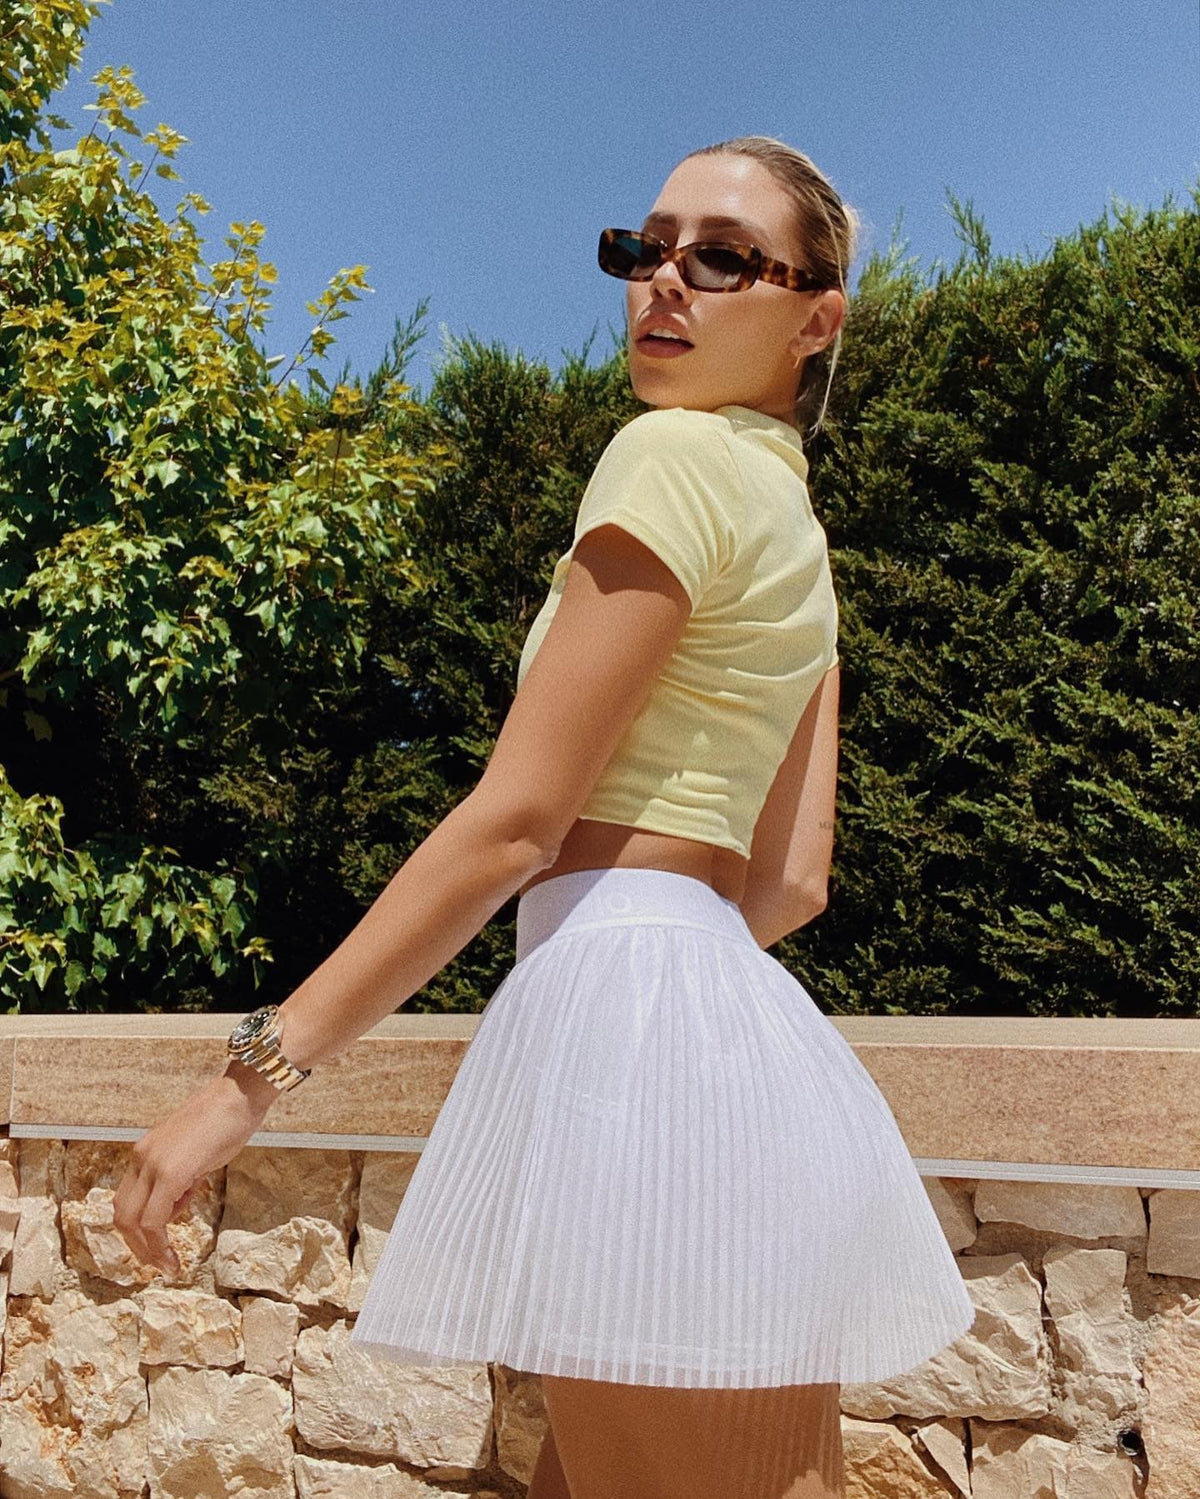 @michellesalasb wearing a Mesh Flirty Tennis Skirt in White with a Choice Polo in Buttercup while posing outside.  